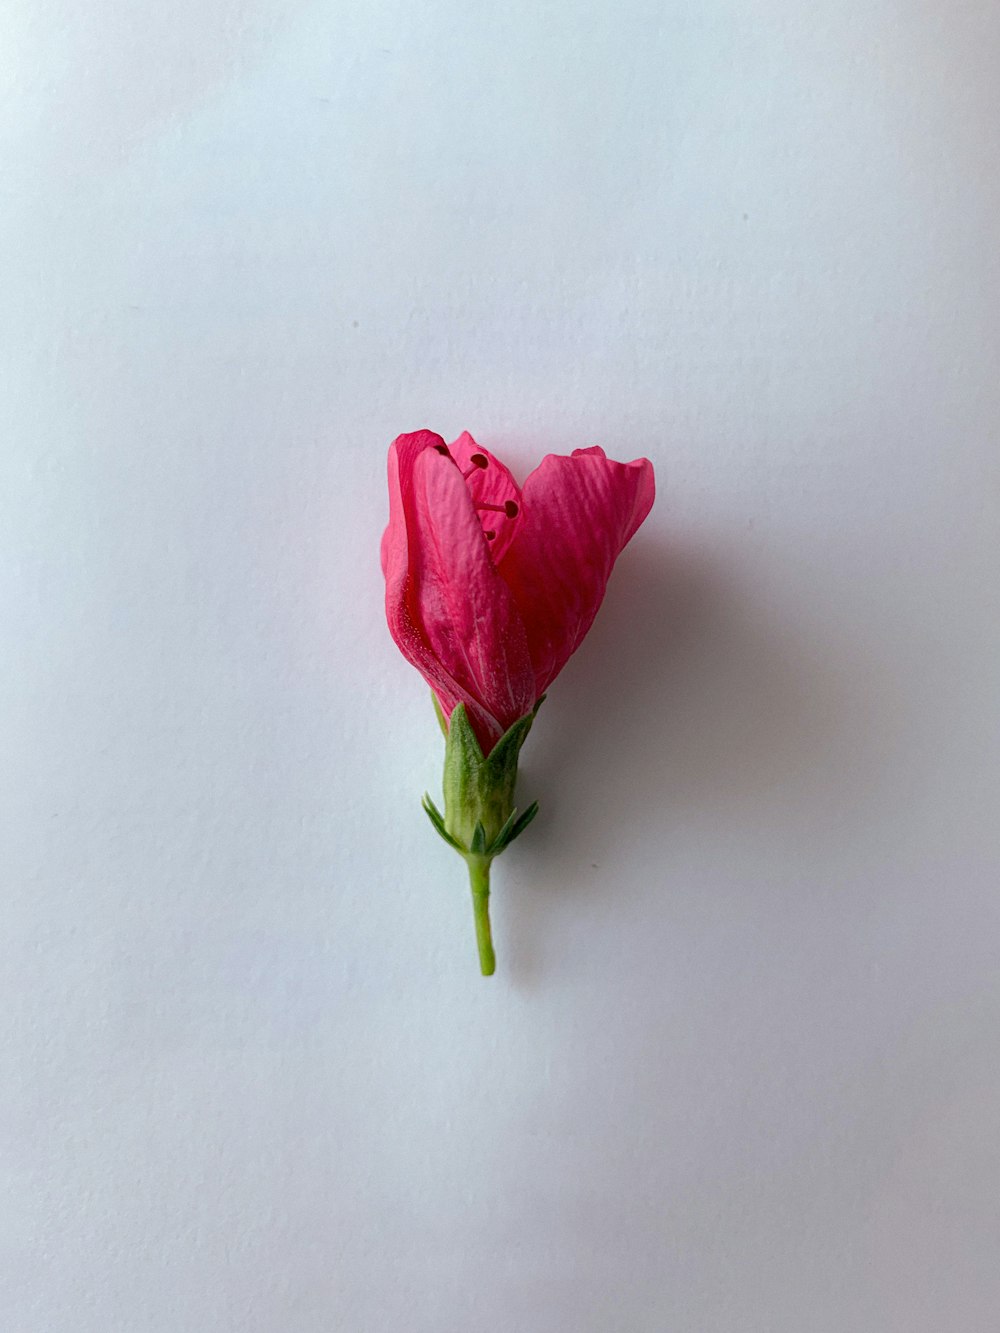 a single pink flower on a white surface